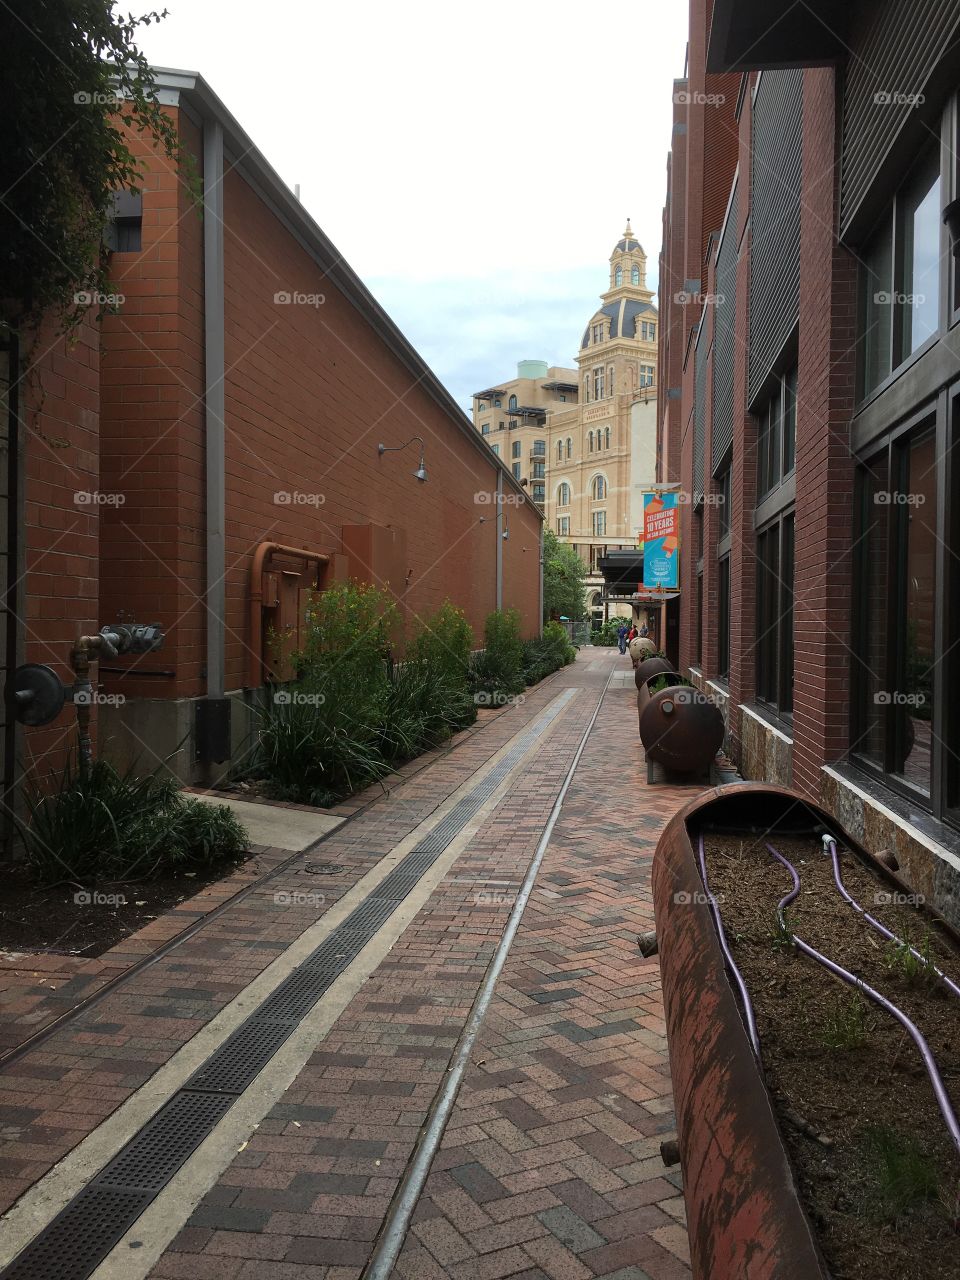 An alleyway at the San Antonio Pearl brewery